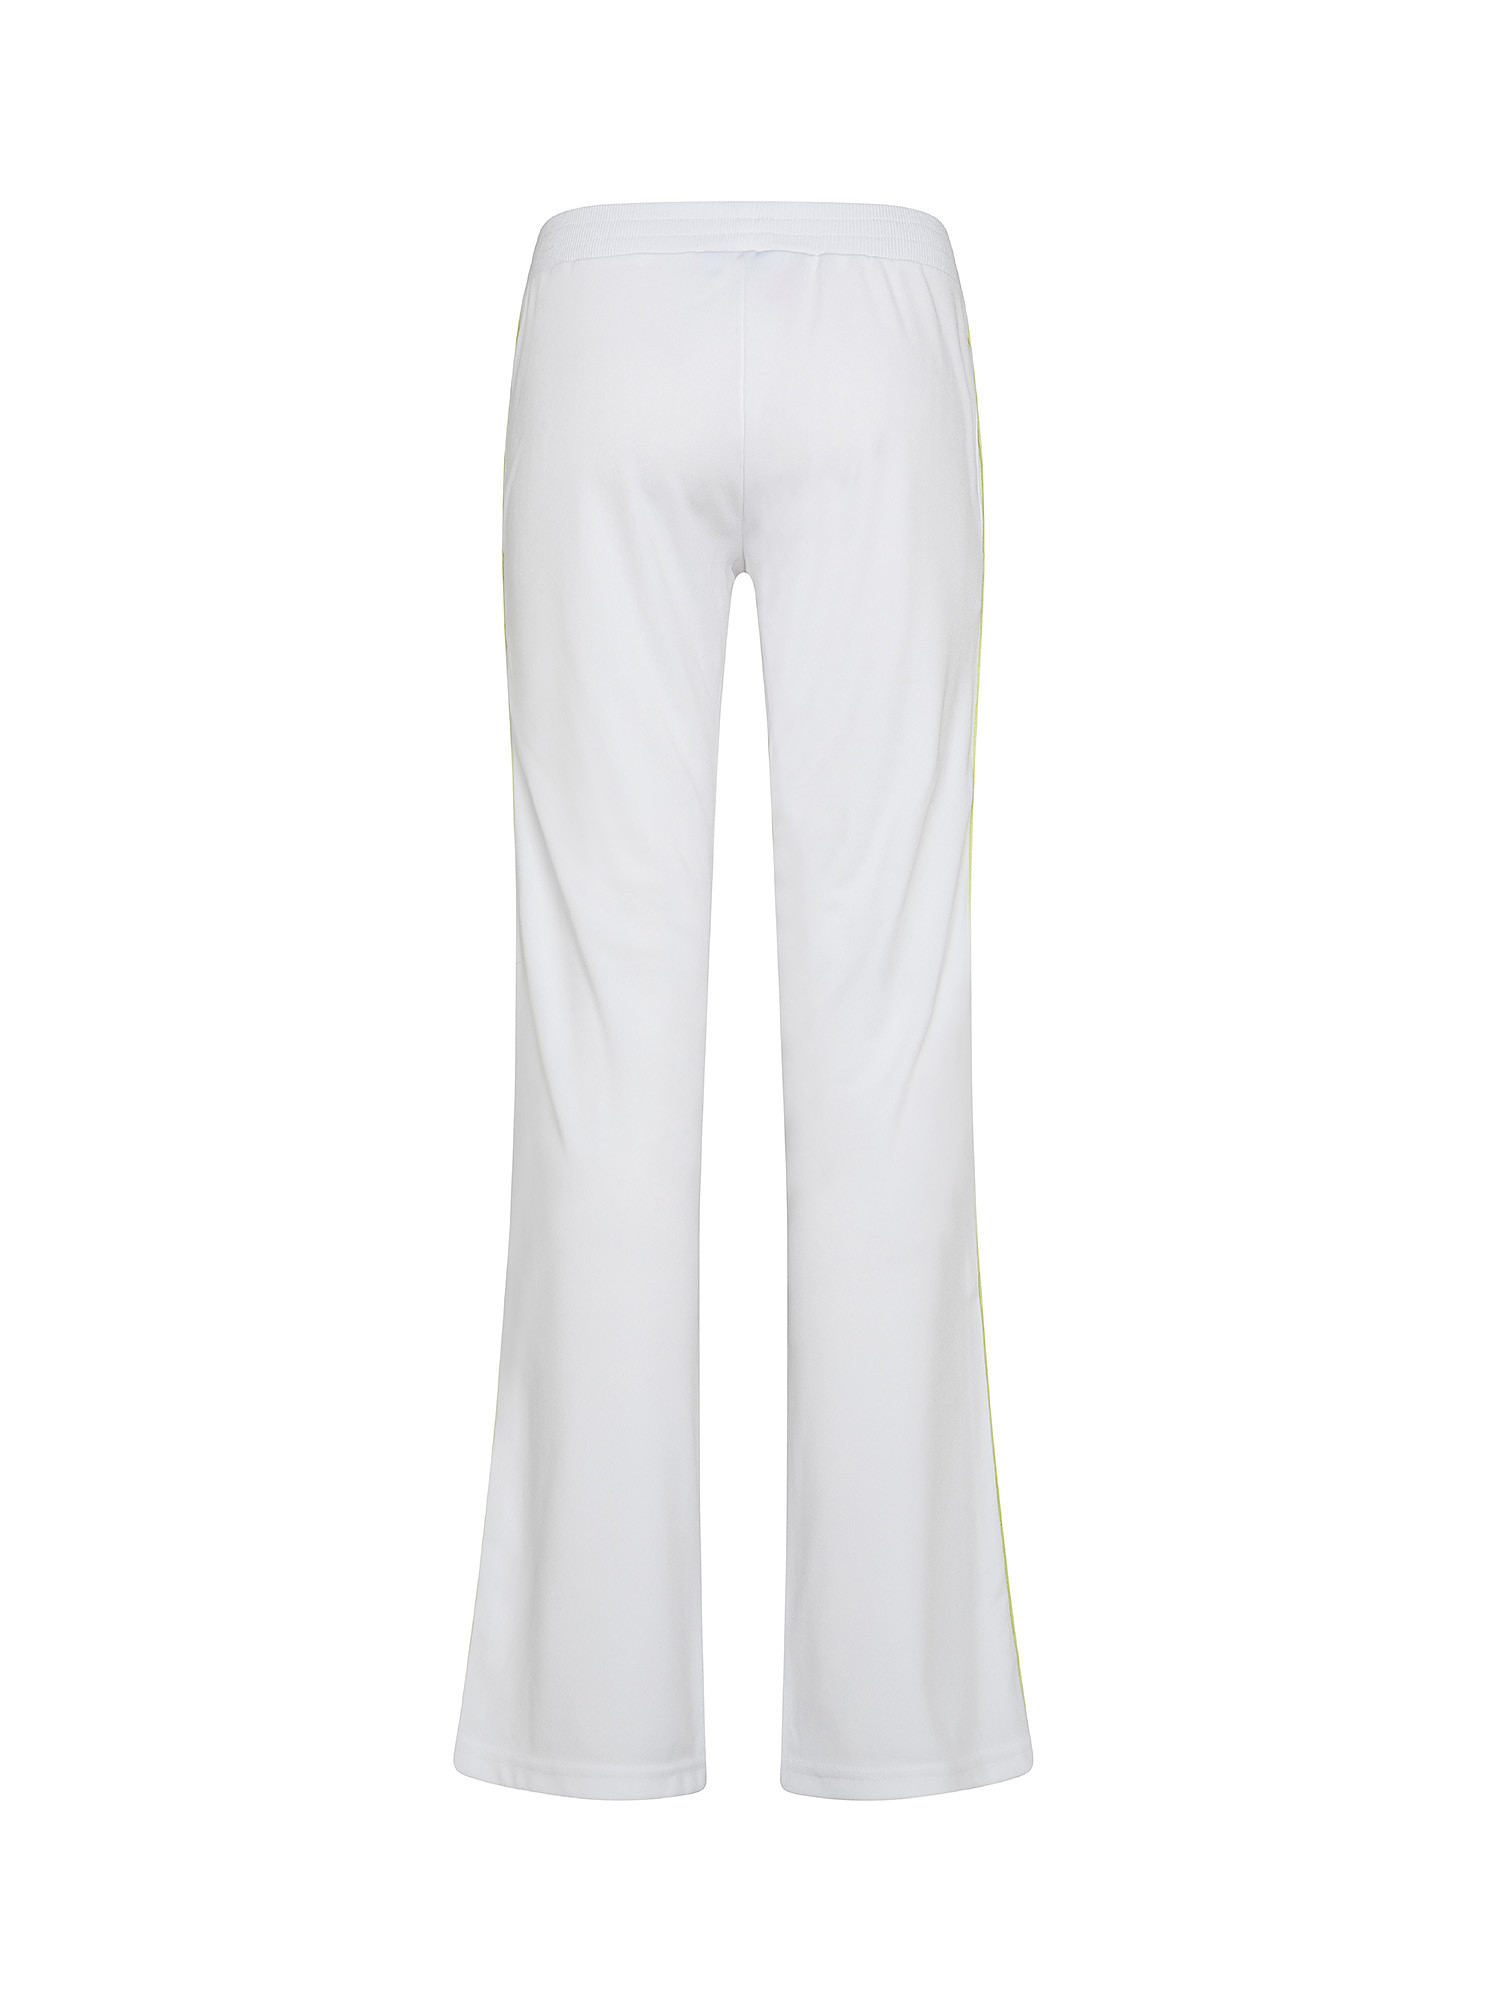 Trousers, White, large image number 1